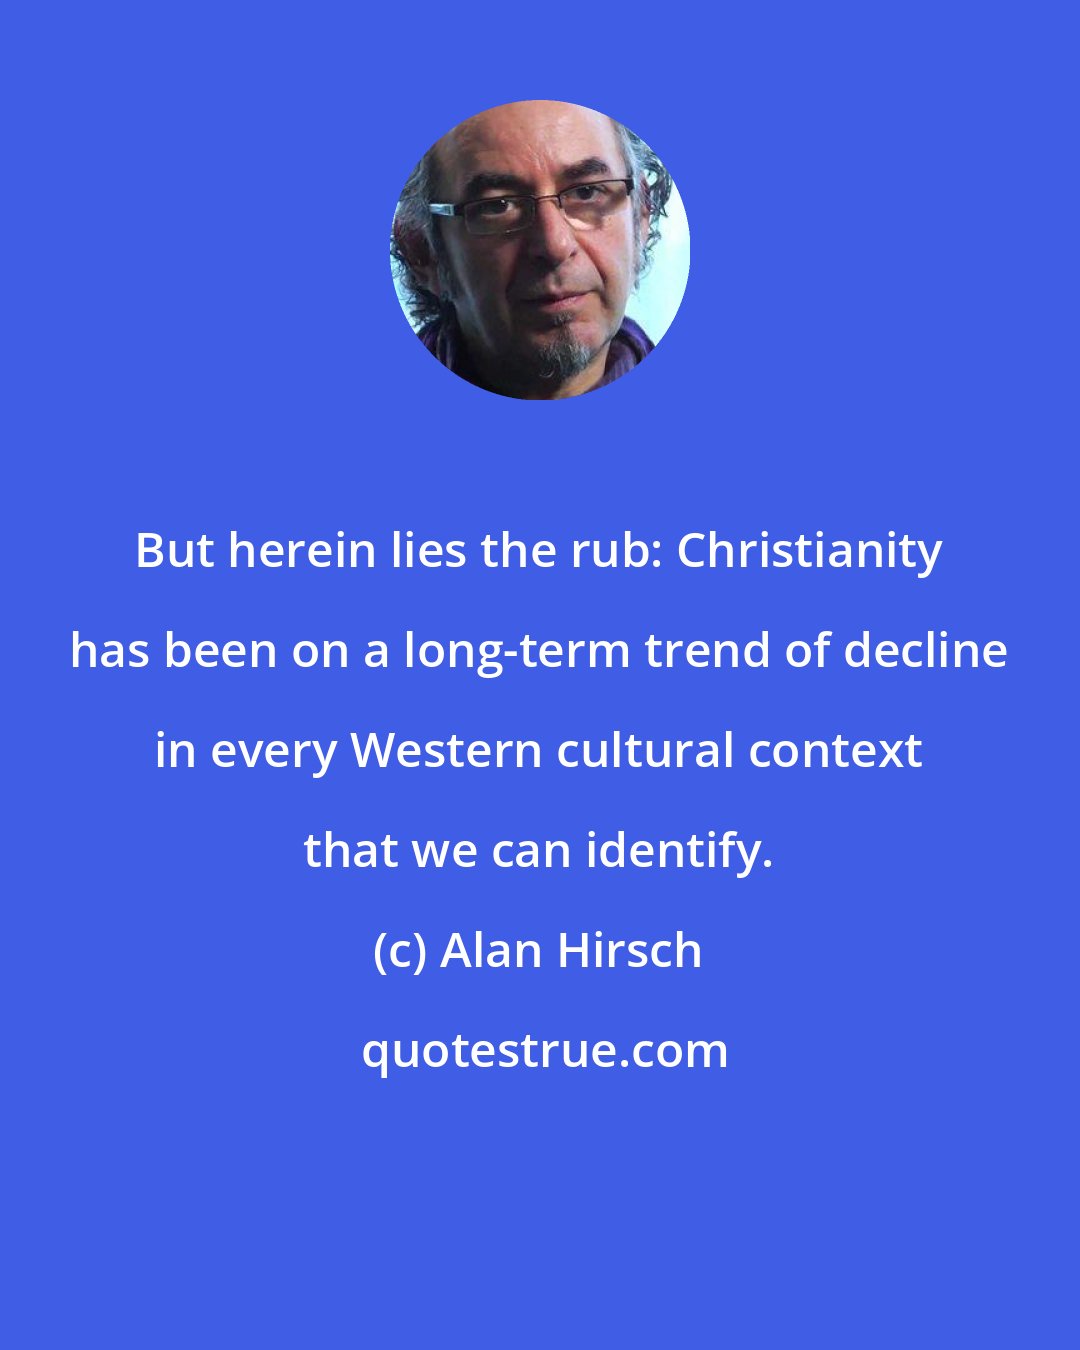 Alan Hirsch: But herein lies the rub: Christianity has been on a long-term trend of decline in every Western cultural context that we can identify.